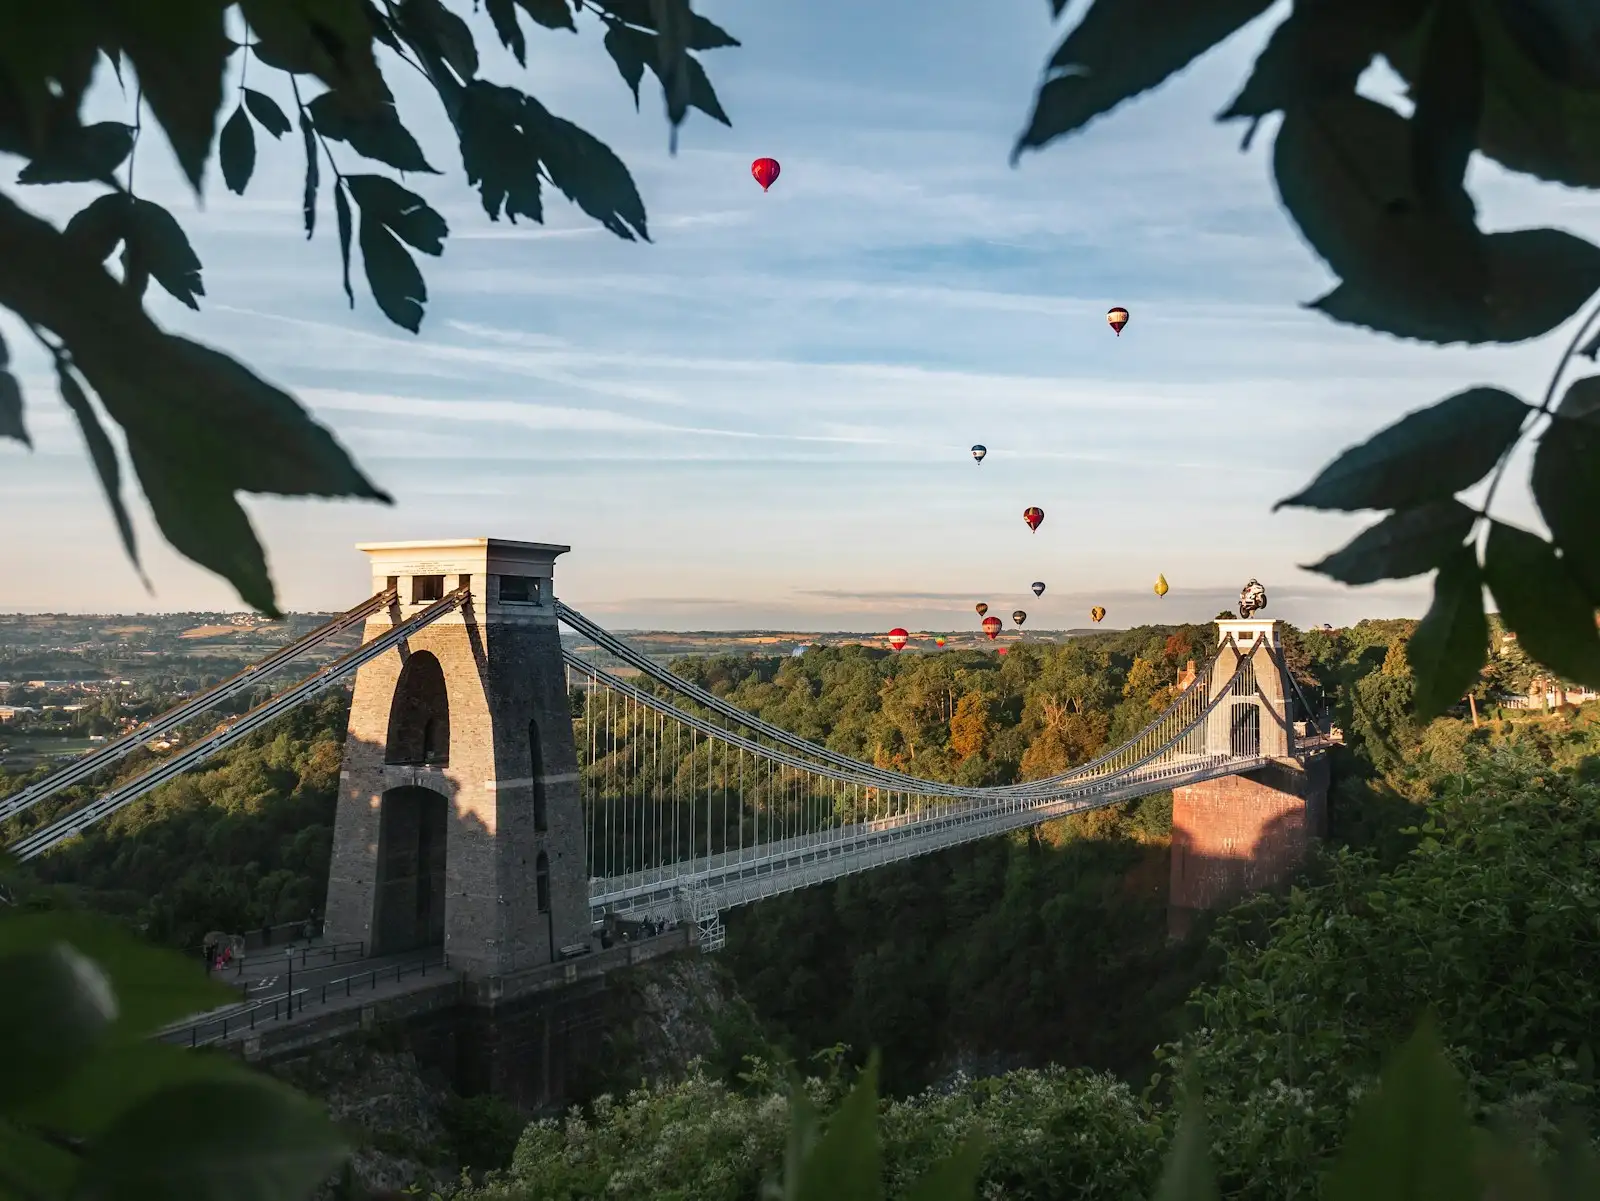 Are These Places In The US Or The UK Quiz Bristol hot air balloons, England, United Kingdom